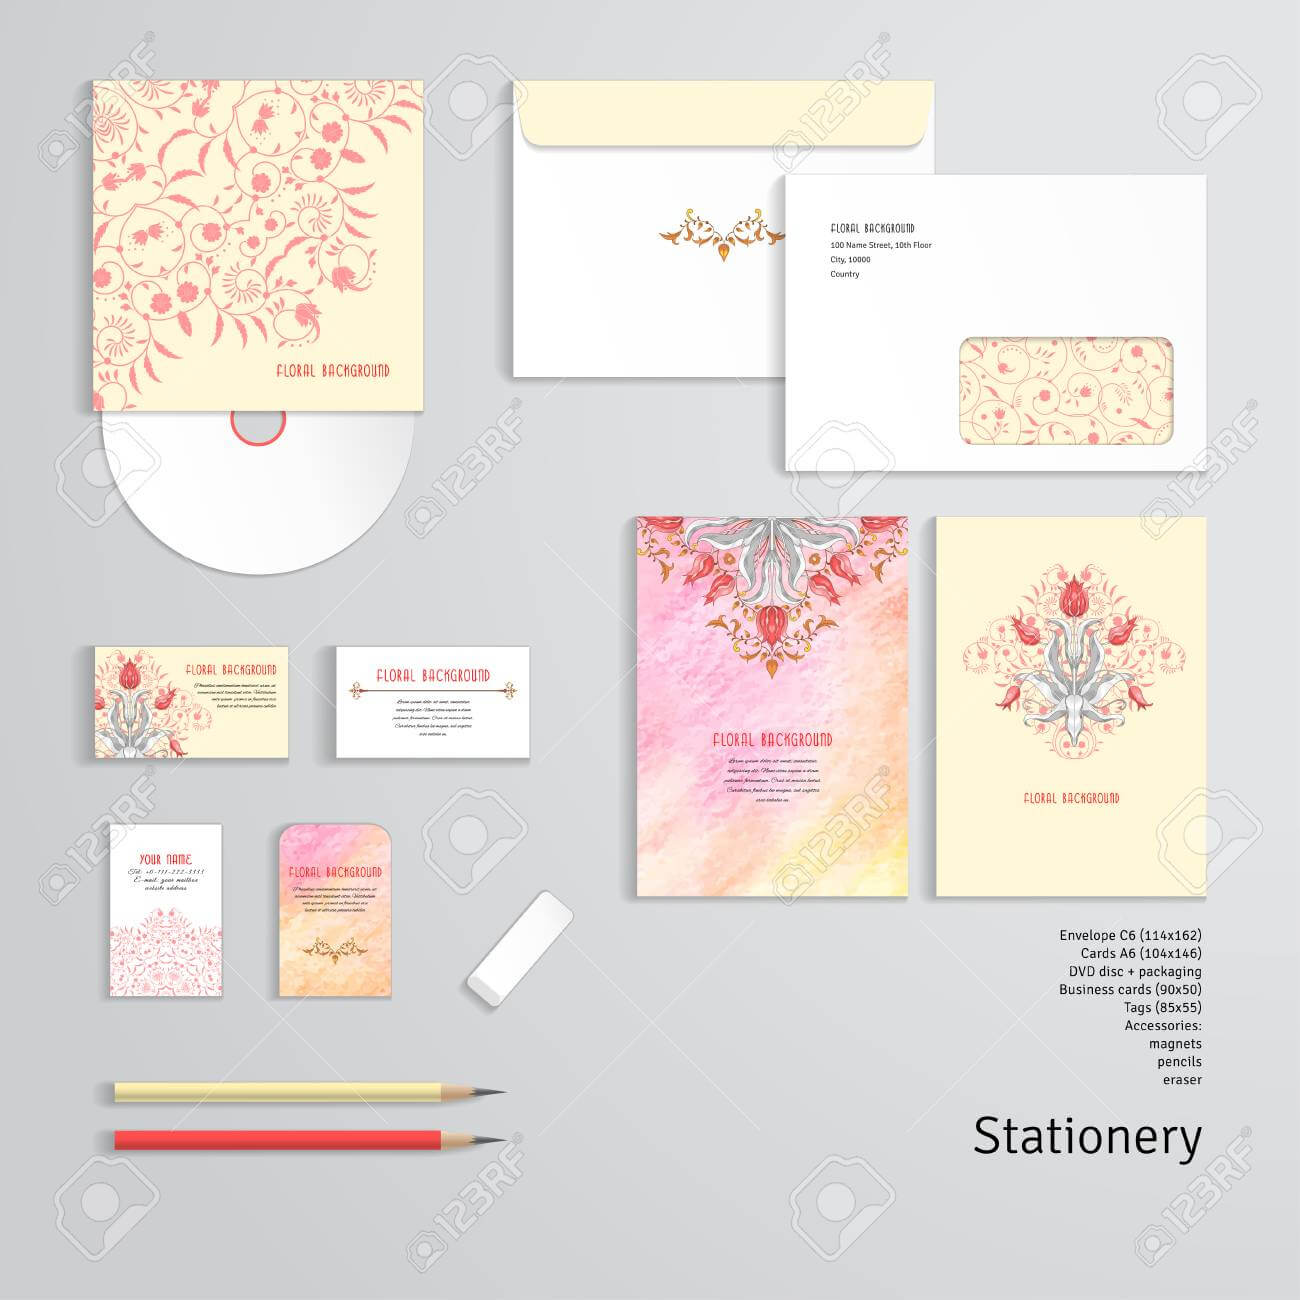 Vector Identity Templates. Letterhead, Envelope, Business Card,.. With Regard To Business Card Letterhead Envelope Template